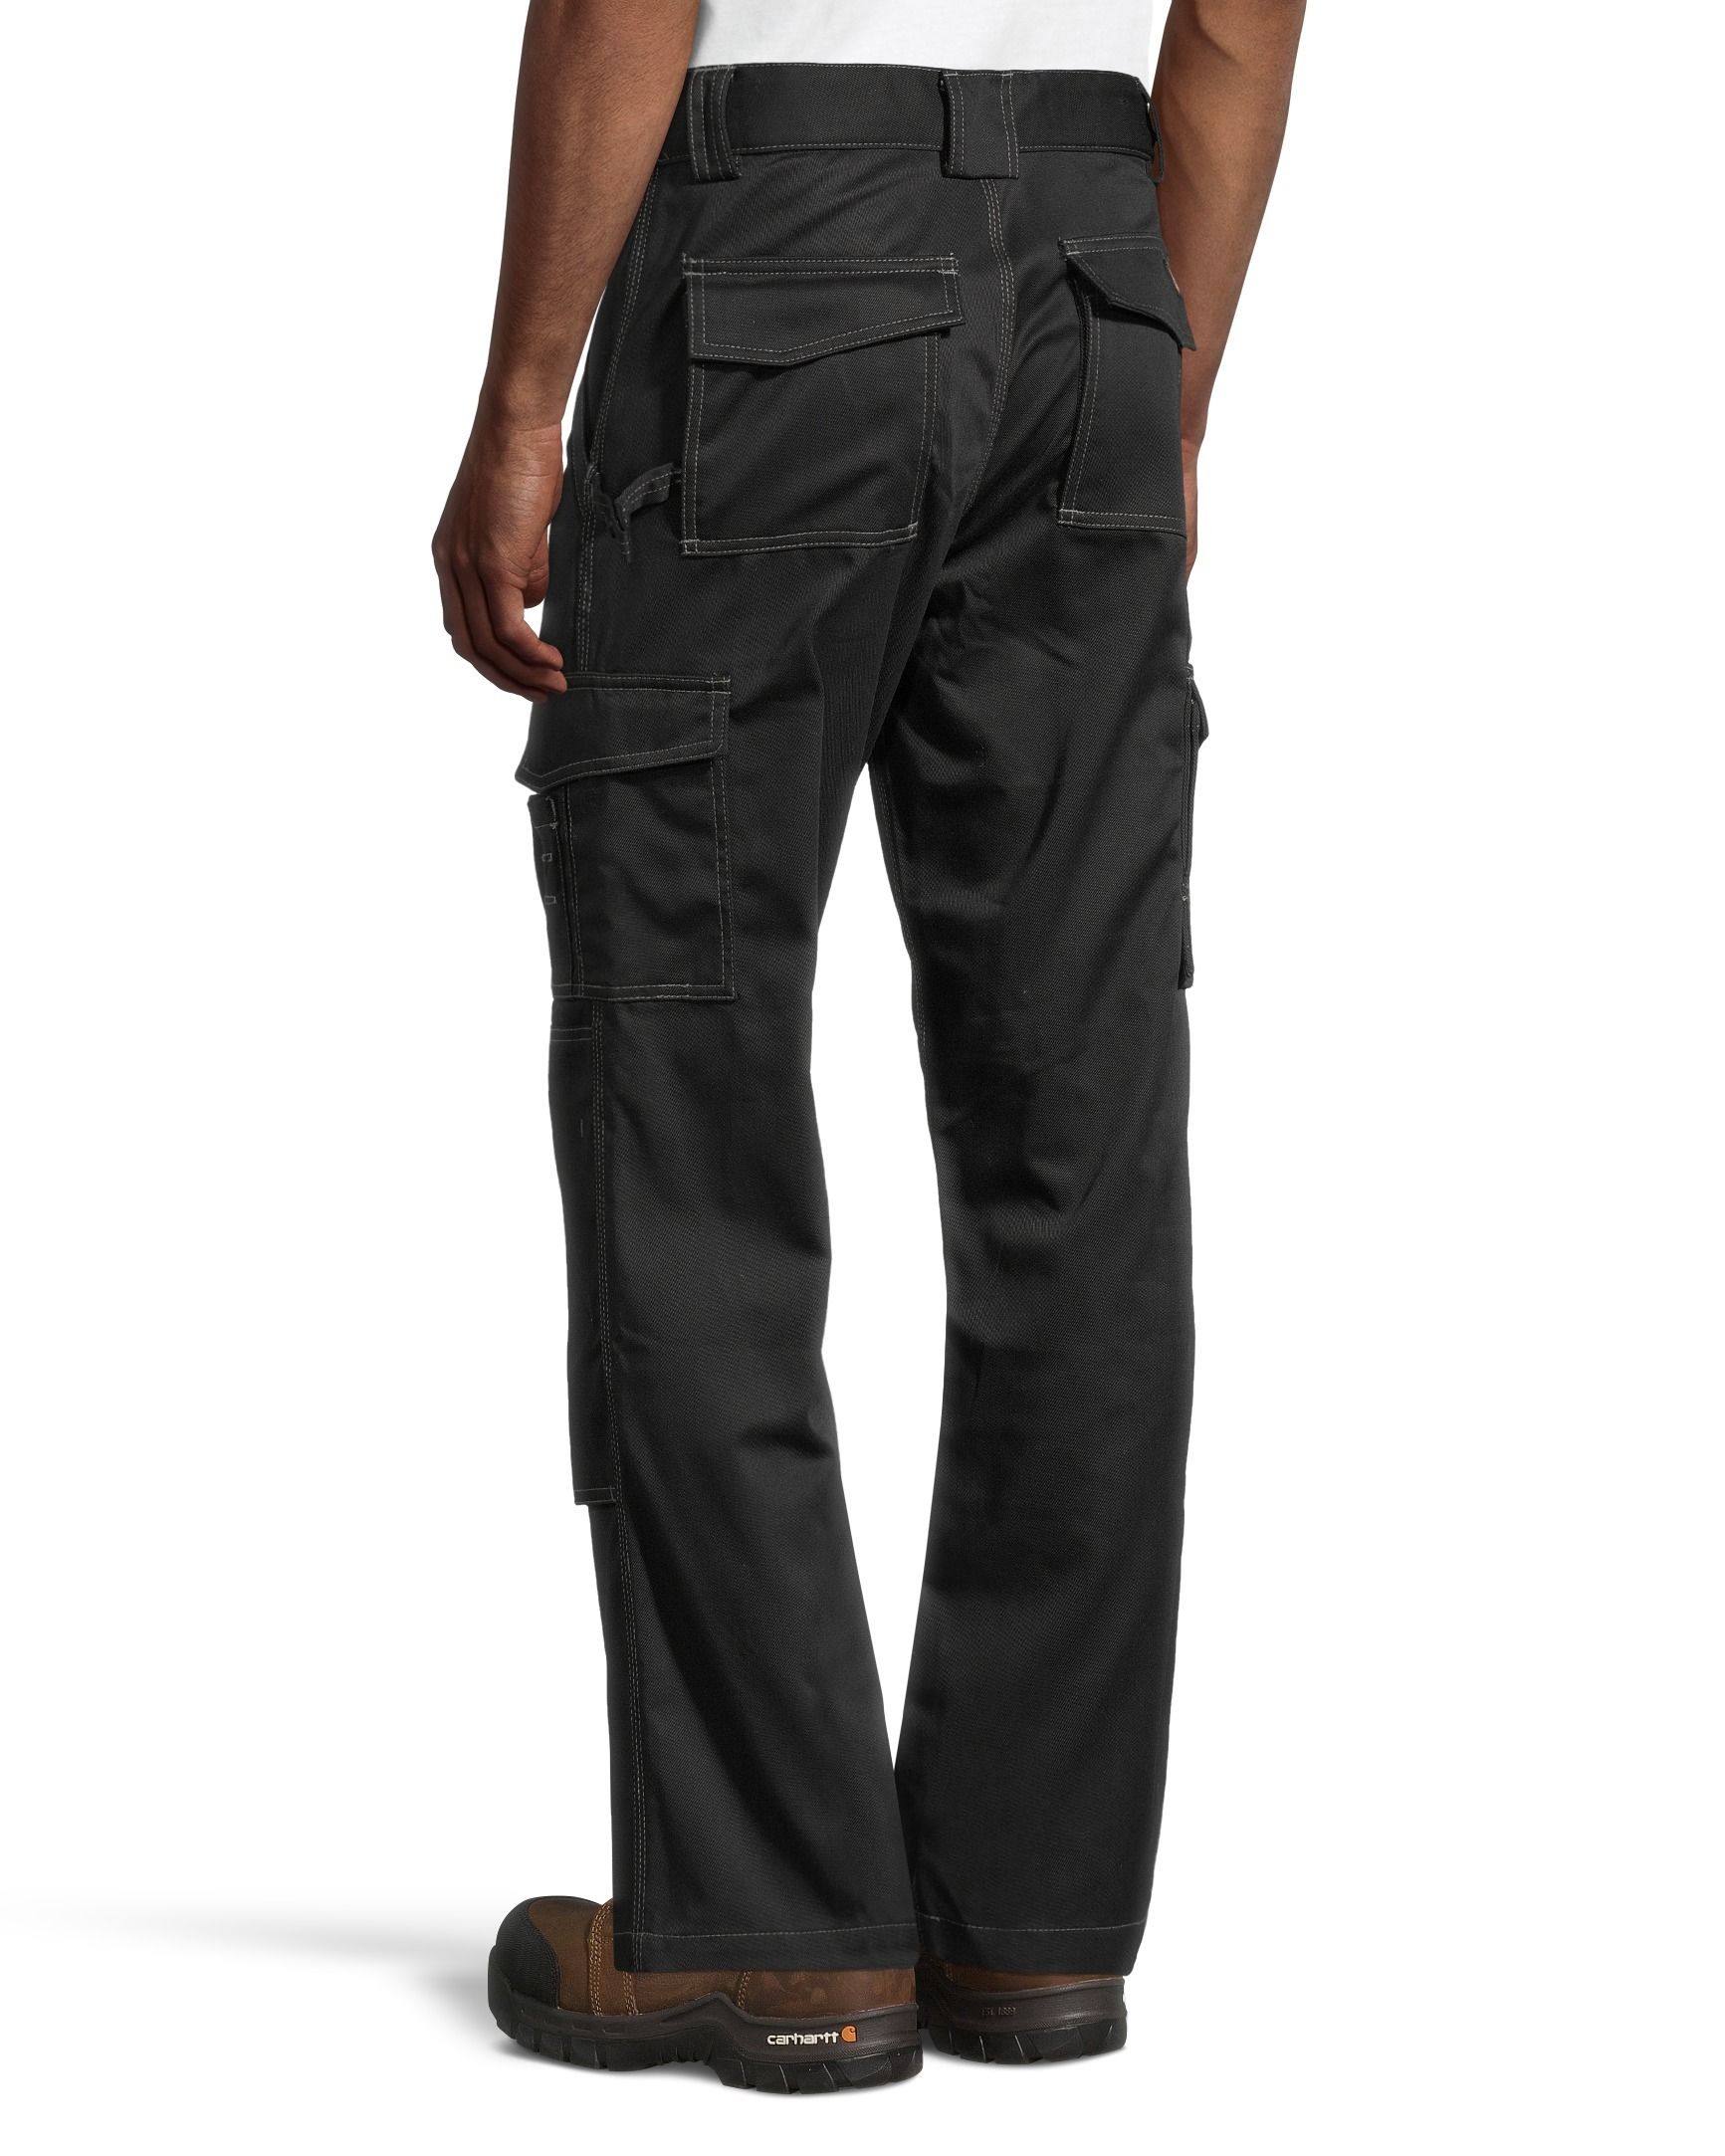 https://media-www.marks.com/product/marks-work-wearhouse/industrial-world/workwear/410030854465/dickies-industry-2-0-work-trouser-7c5f6bda-a614-44be-89cf-342492409185-jpgrendition.jpg?imdensity=1&imwidth=1244&impolicy=mZoom